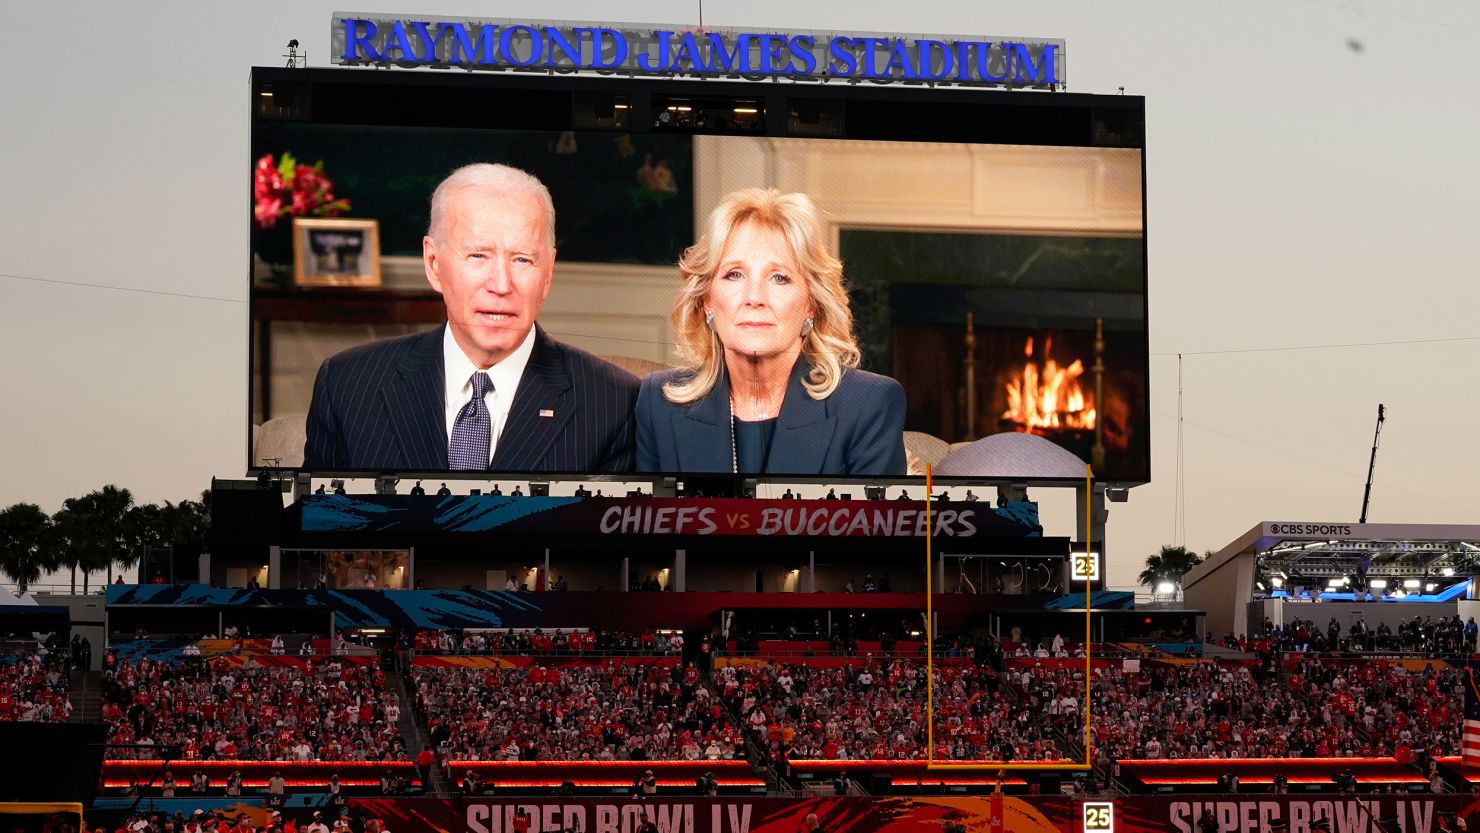 Fans watch a broadcast of President Joe Biden and first lady Jill Biden before the NFL Super Bowl 55 football game between the Kansas City Chiefs and Tampa Bay Buccaneers.